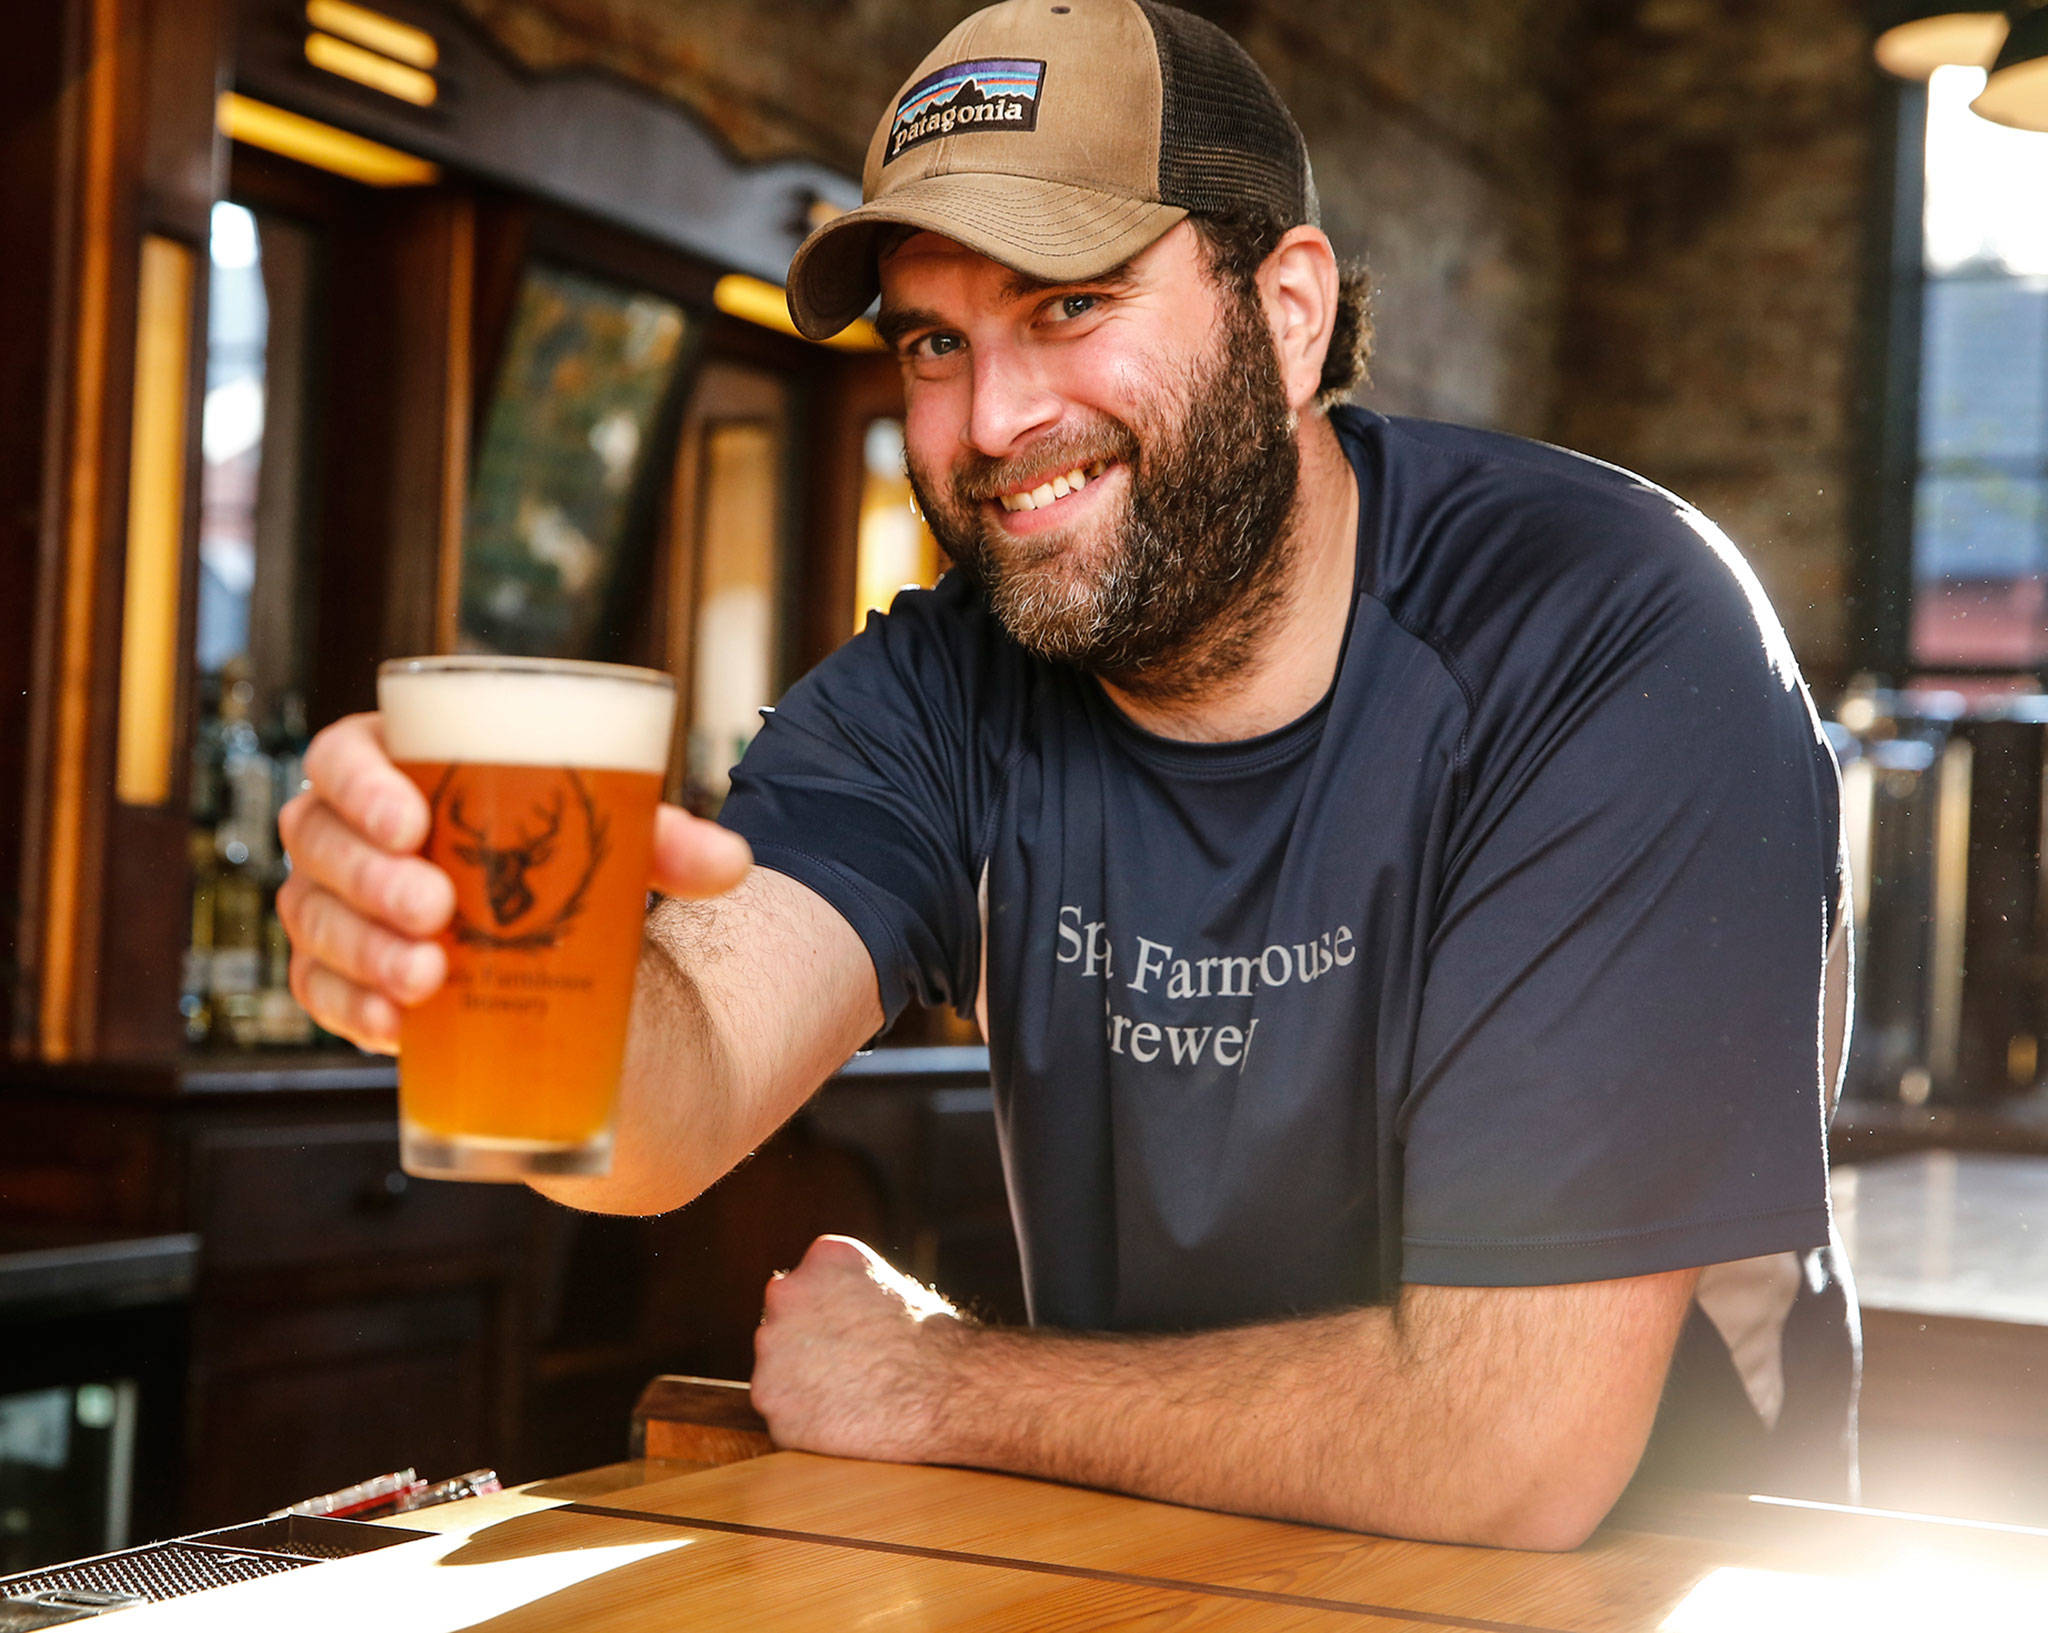 John Spada, owner of Spada Farmhouse Brewery in Snohomish, opens his new restaurant and bar on First Street on Dec. 4. (Kevin Clark / The Herald)